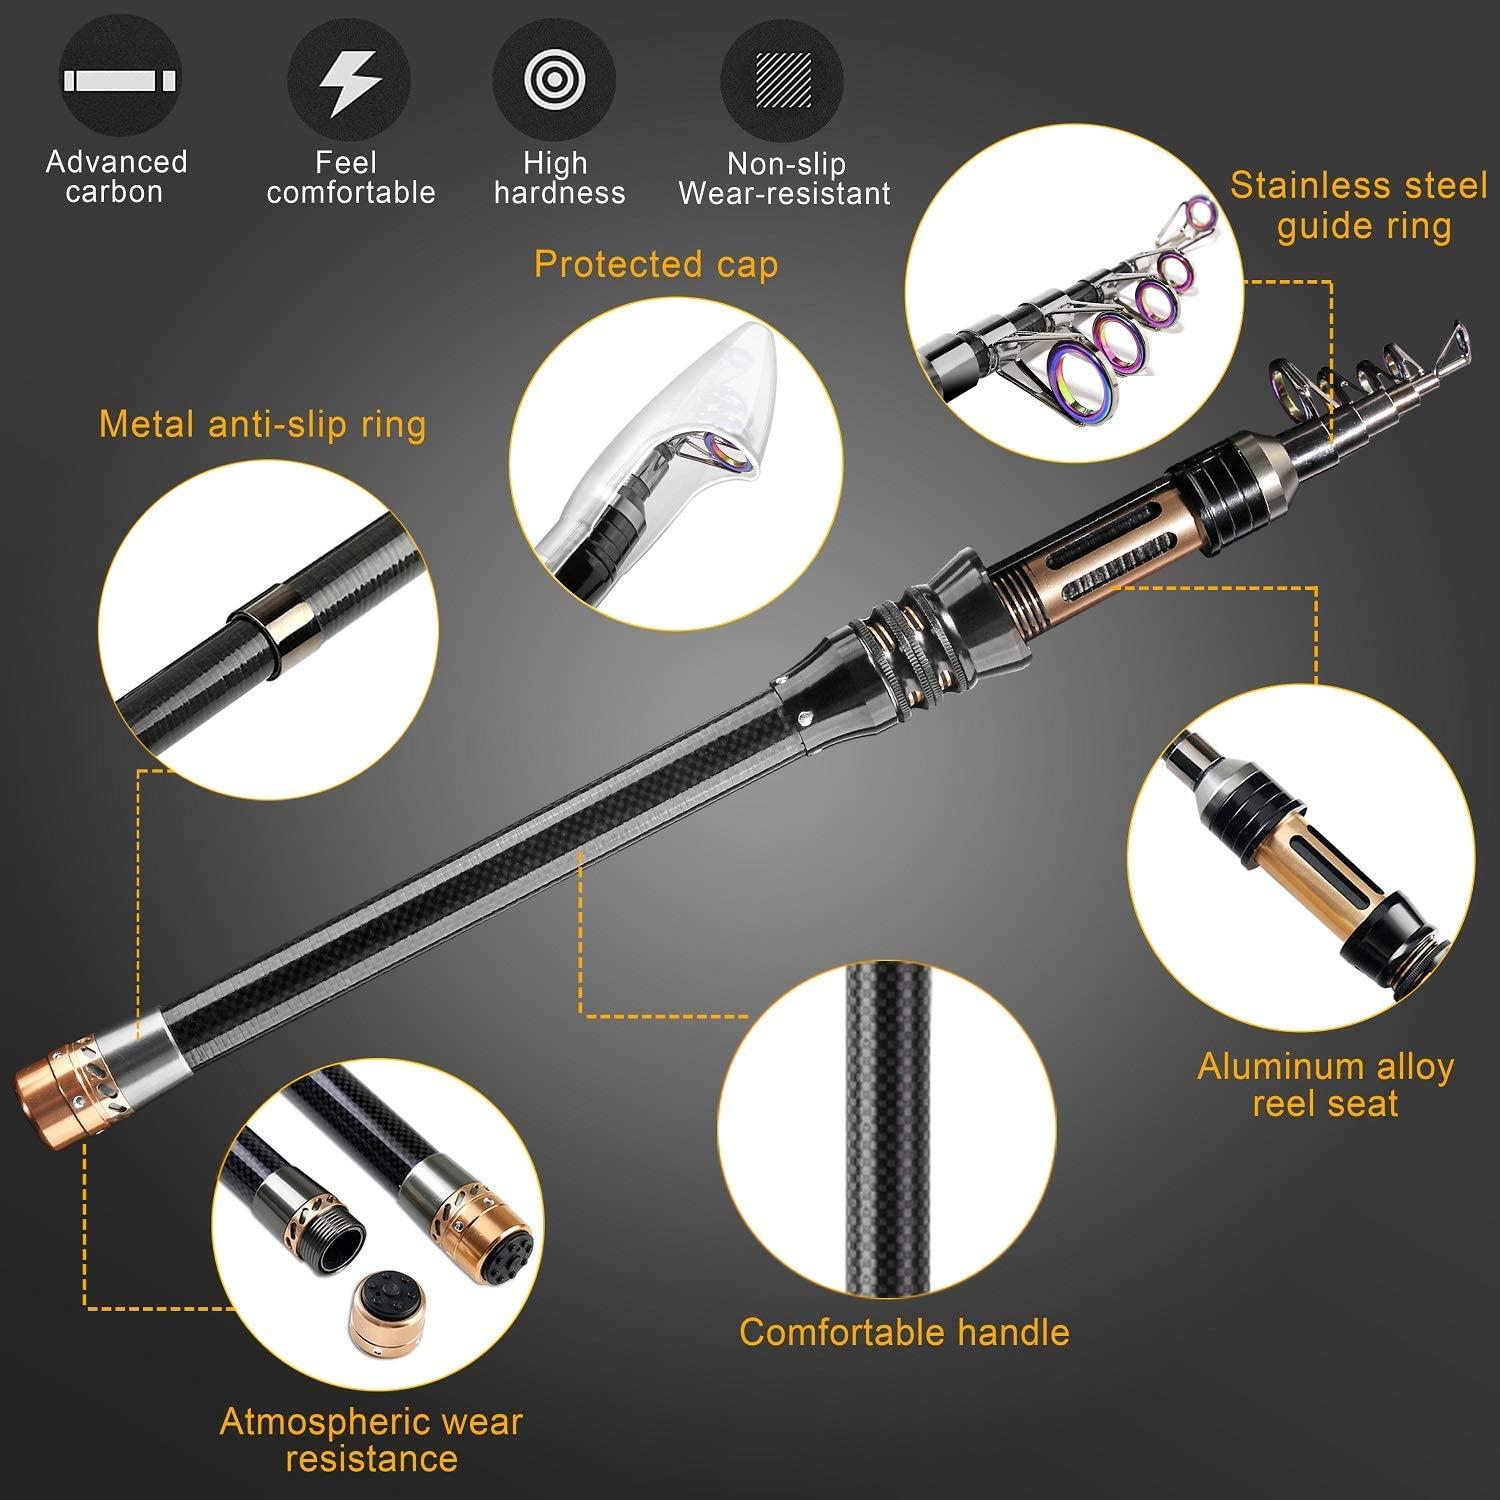 Castaroud Telescopic Fishing Rod Kit, Carbon Fiber Fishing Pole and Reel  Combos with Spinning Reel, Fishing Gears and Travel Bag for Saltwater